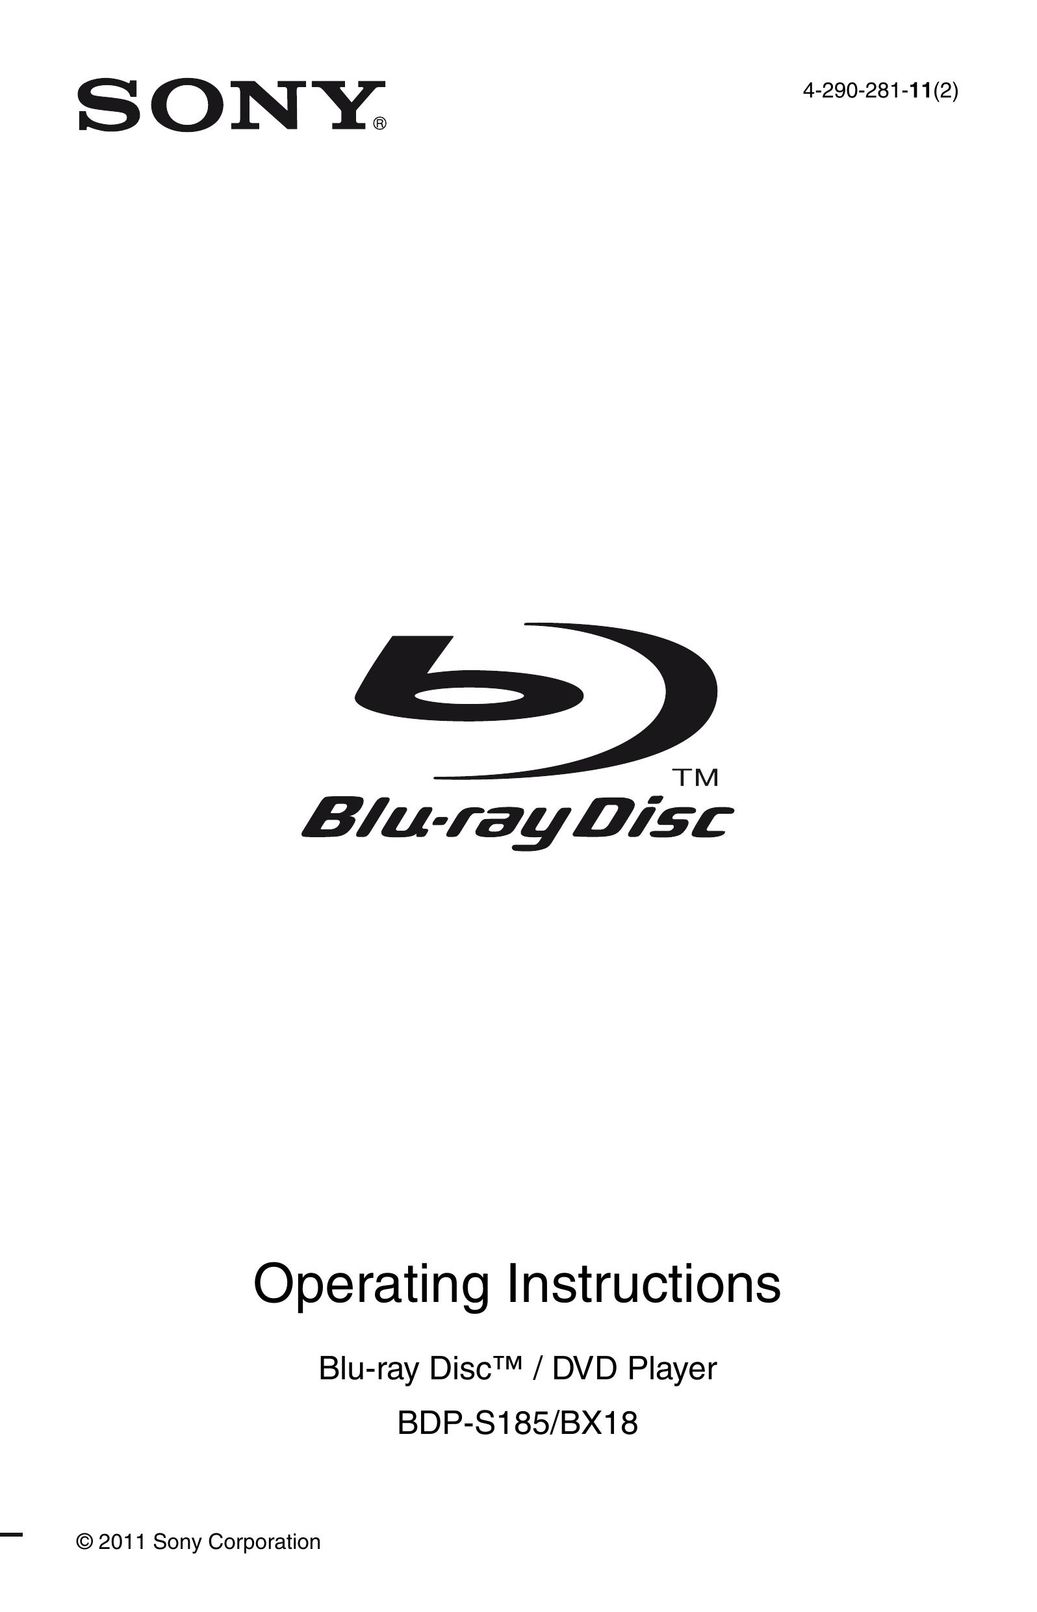 Sony BDP-S185 DVD Player User Manual